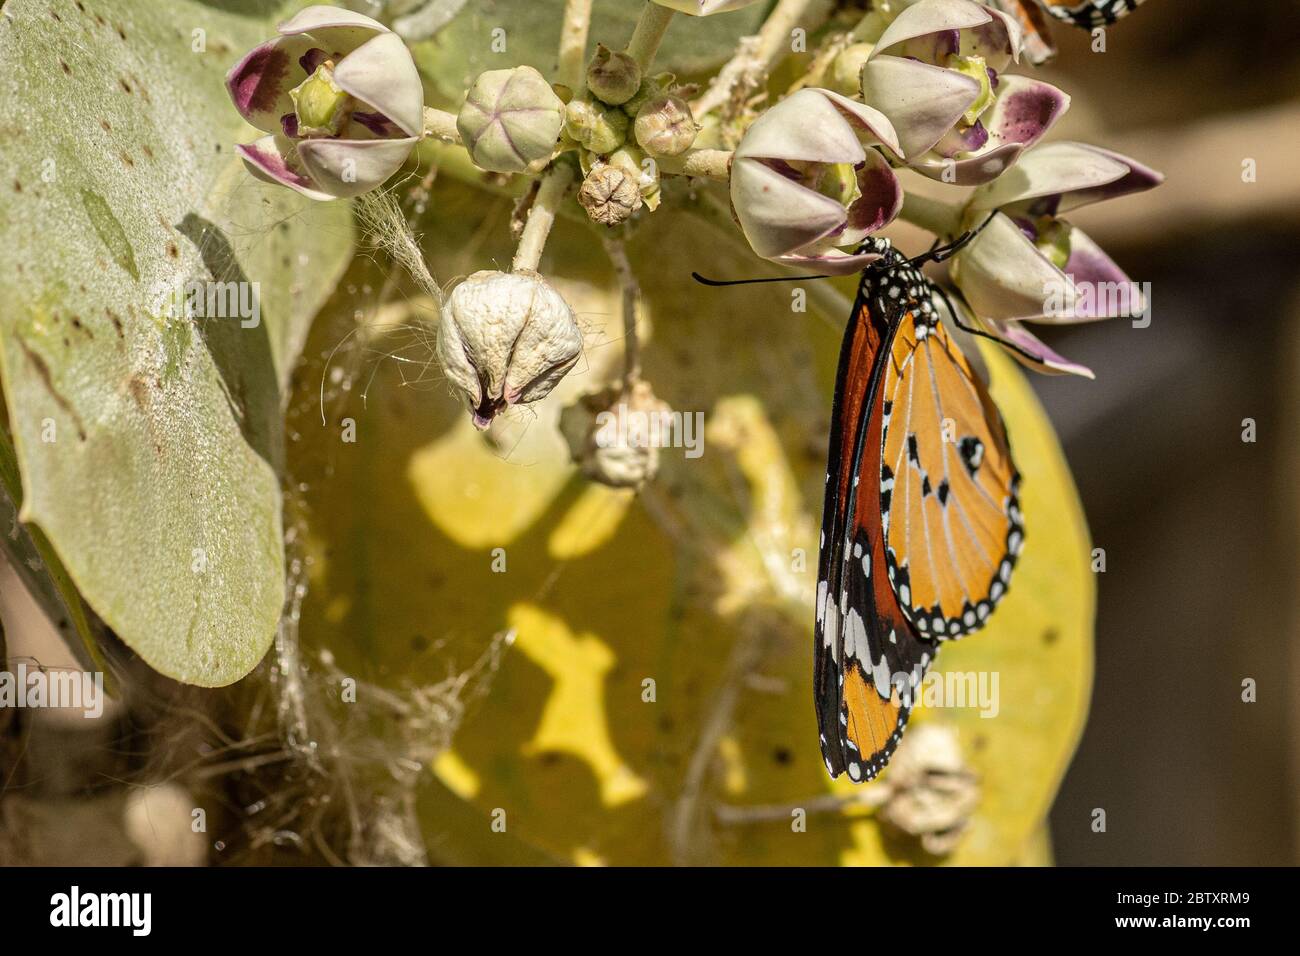 Plain Tiger (Danaus chrysippus) AKA African Monarch Butterfly on an Apple of Sodom (Calotropis procera) plant Photographed in Israel, in July Stock Photo